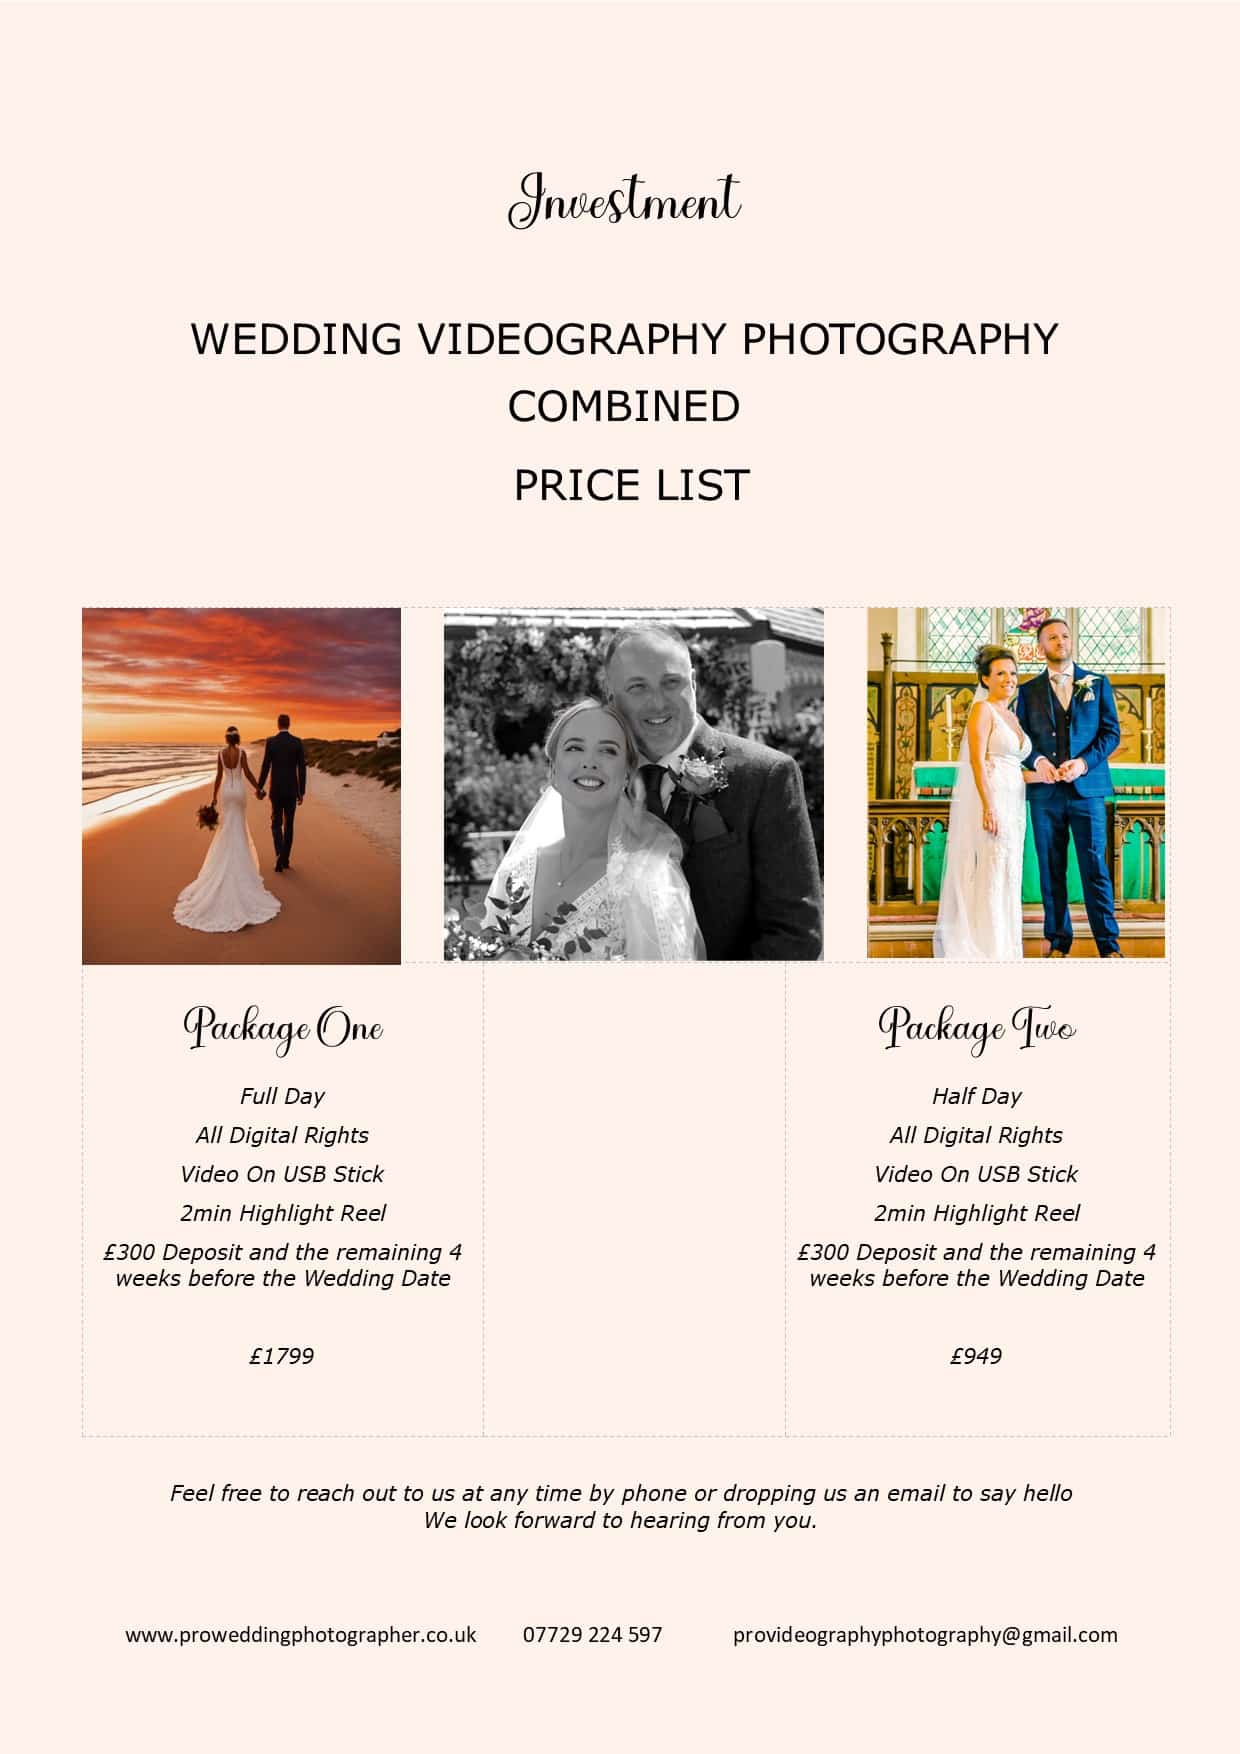 Wedding Video Photography Combined pricing